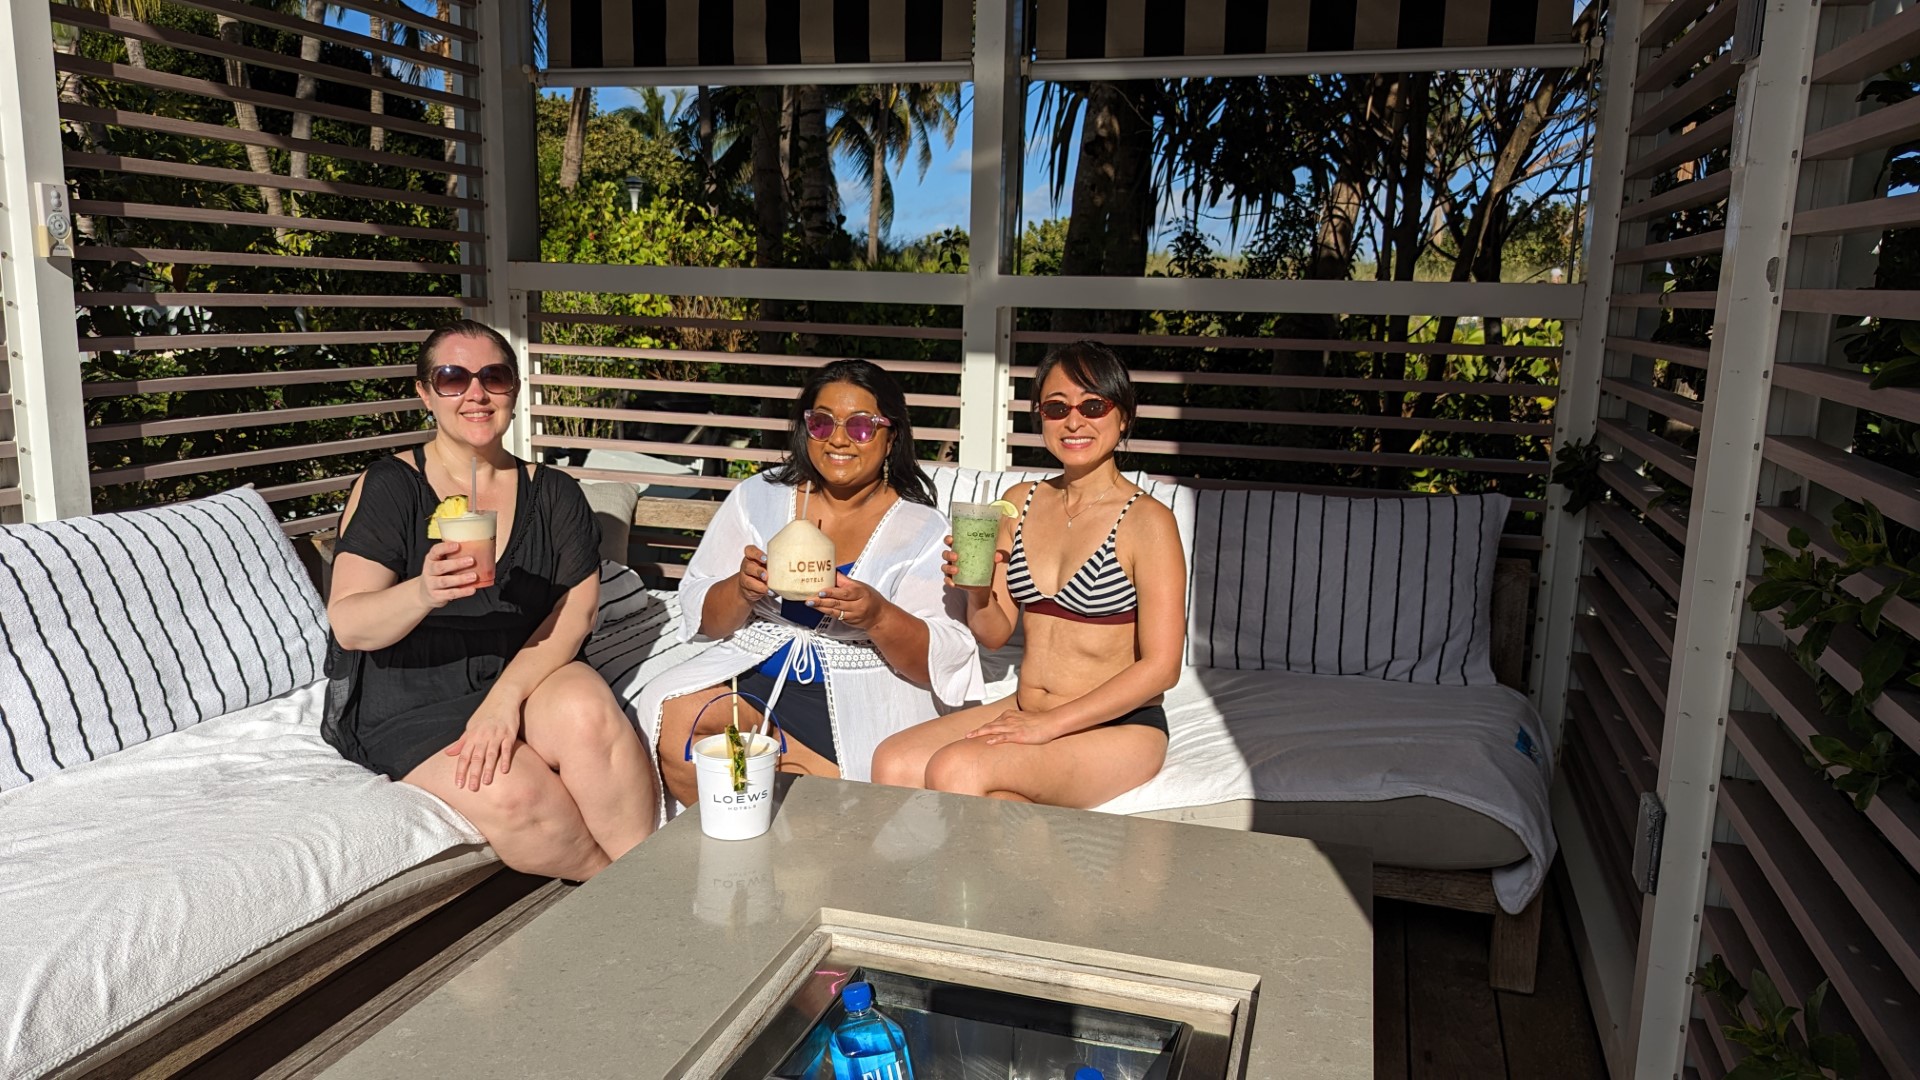 Yashy and friends on girls getaway in Miami